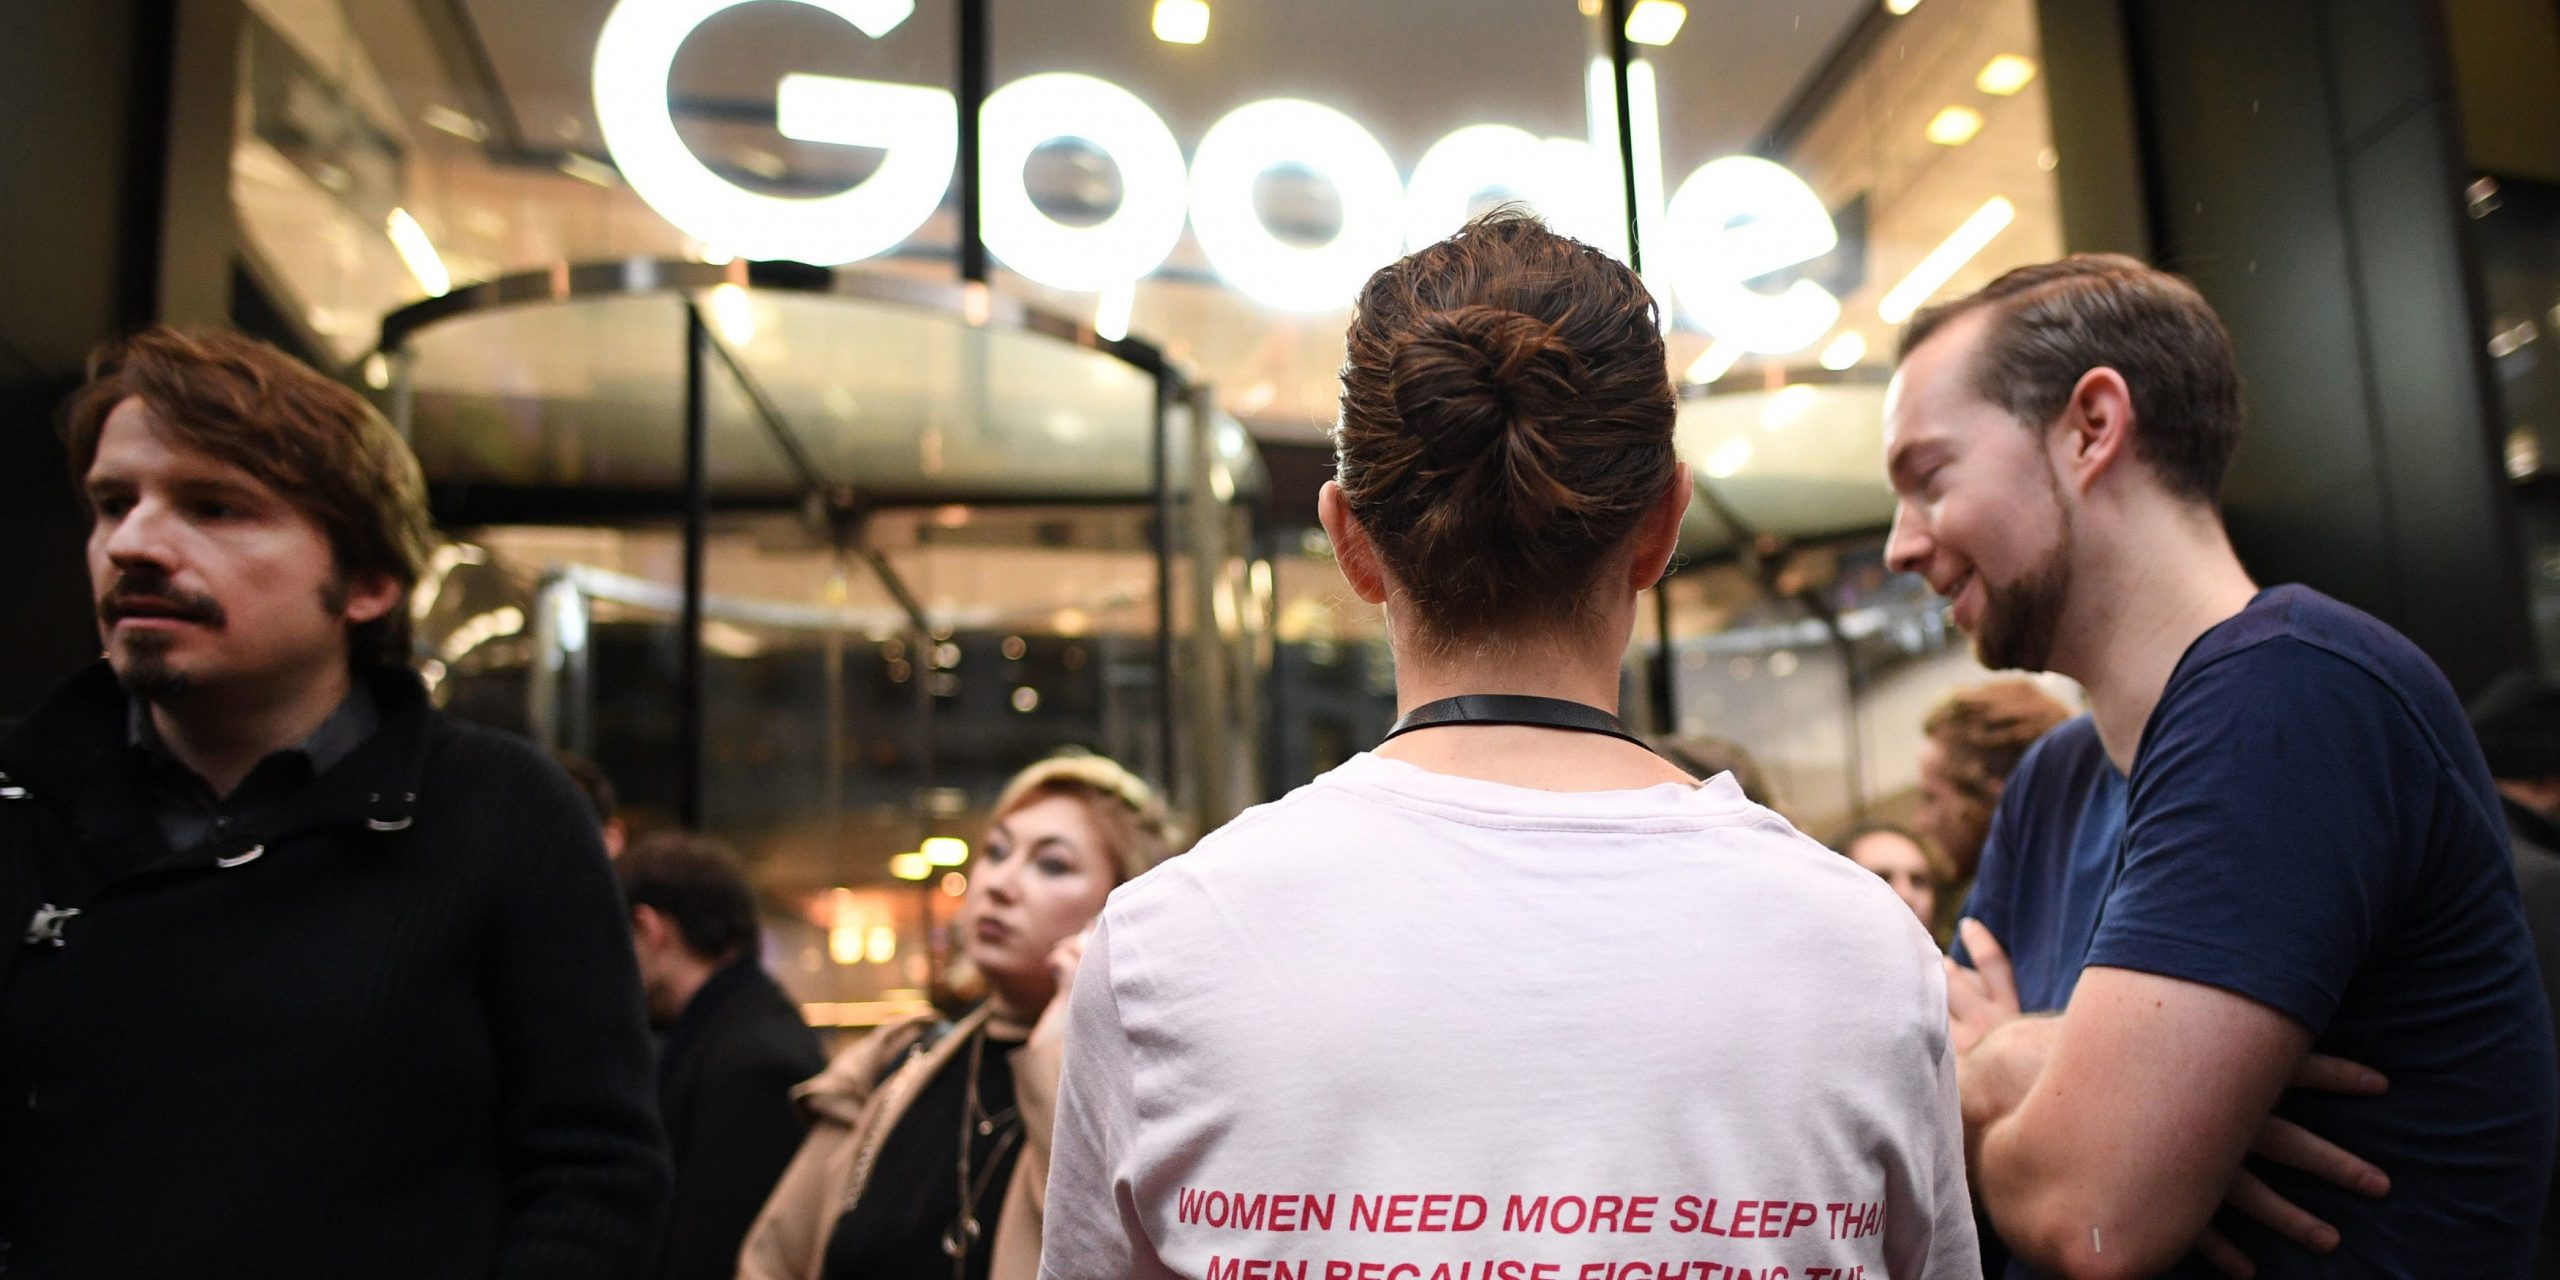 A woman in front of a Google sign on a building, stands with her back facing the camera. On the back of her T-shirt it says "Women need more sleep than men because fighting the patriarchy is exhausting."